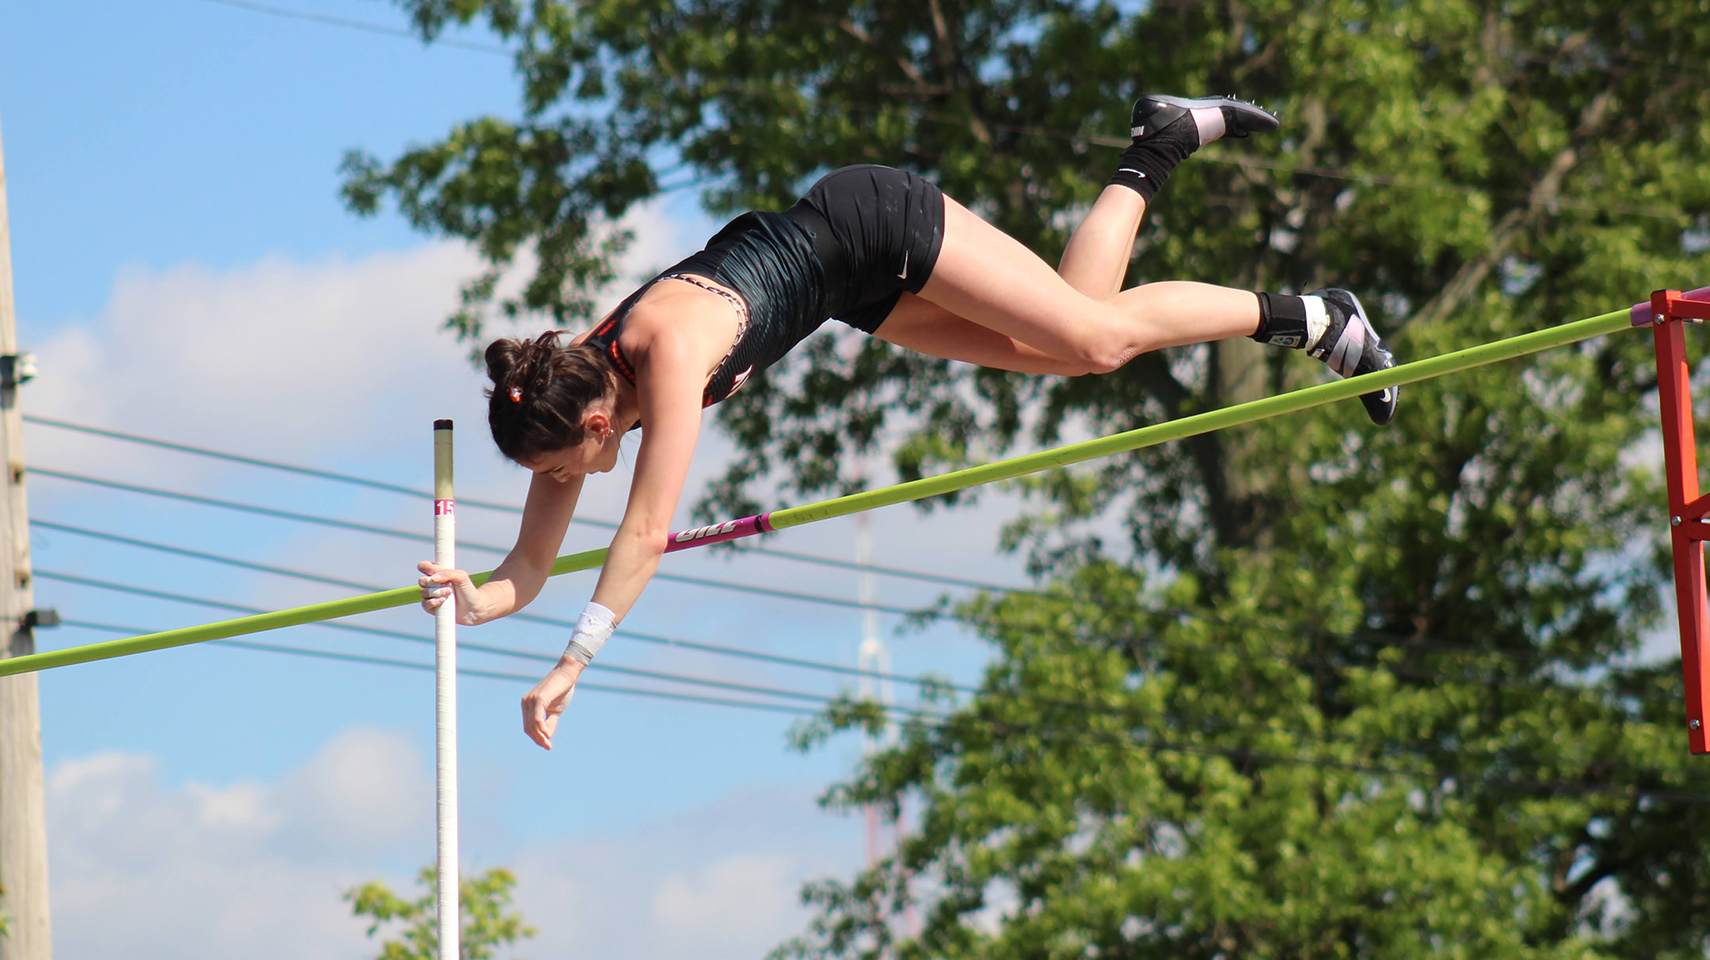 Pole vaulter jumping over the pole in daylight